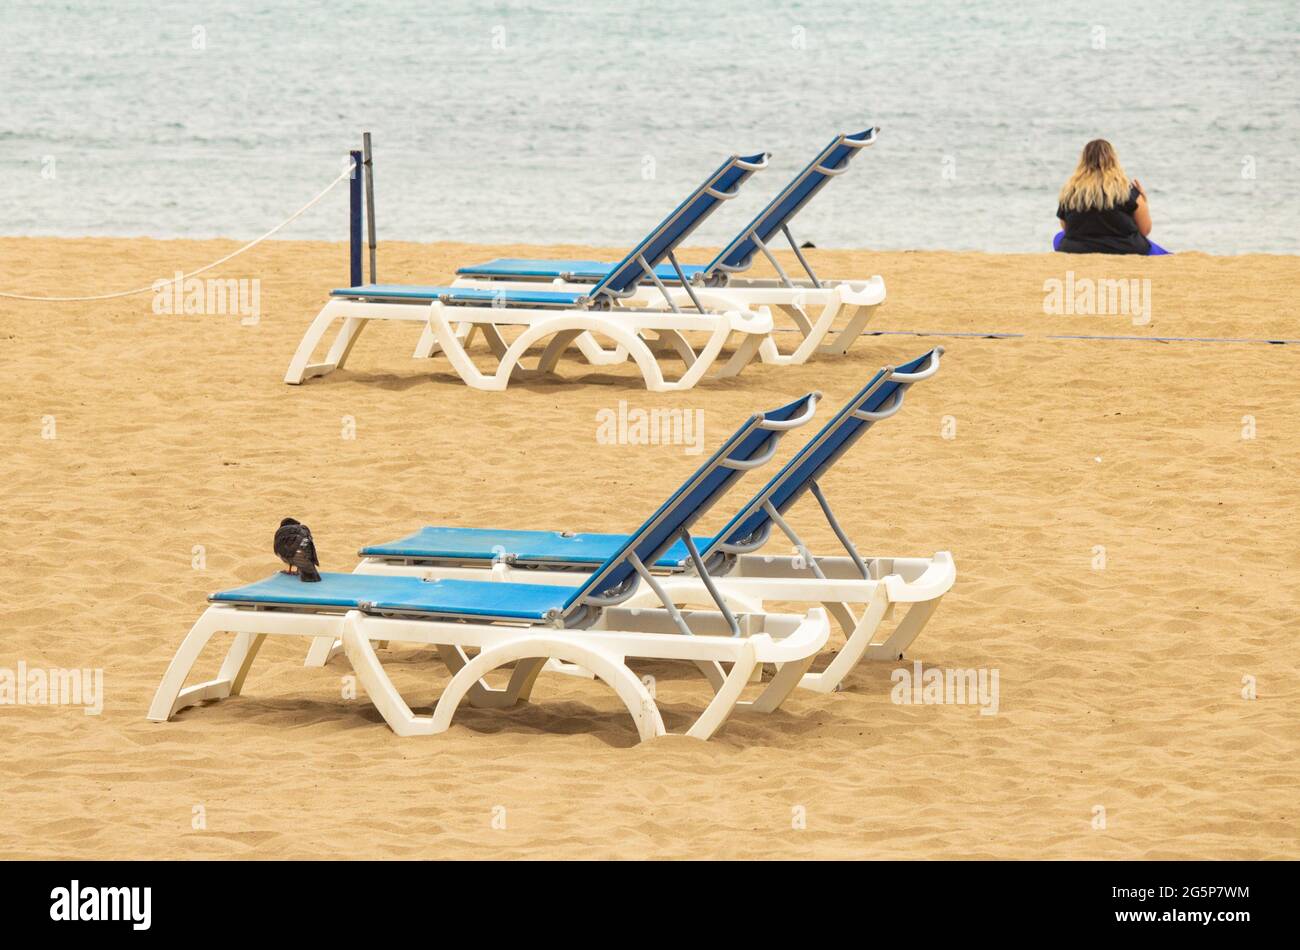 Las Palmas, Gran Canaria, Canary Islands, Spain. 29th June, 2021. Pigeons on sunloungers on a quiet city beach in Las Palmas on Gran Canaria. The Canary Islands remain on the 'Amber list' for British holidaymakers. Credit: Alan Dawson/Alamy Live News. Stock Photo